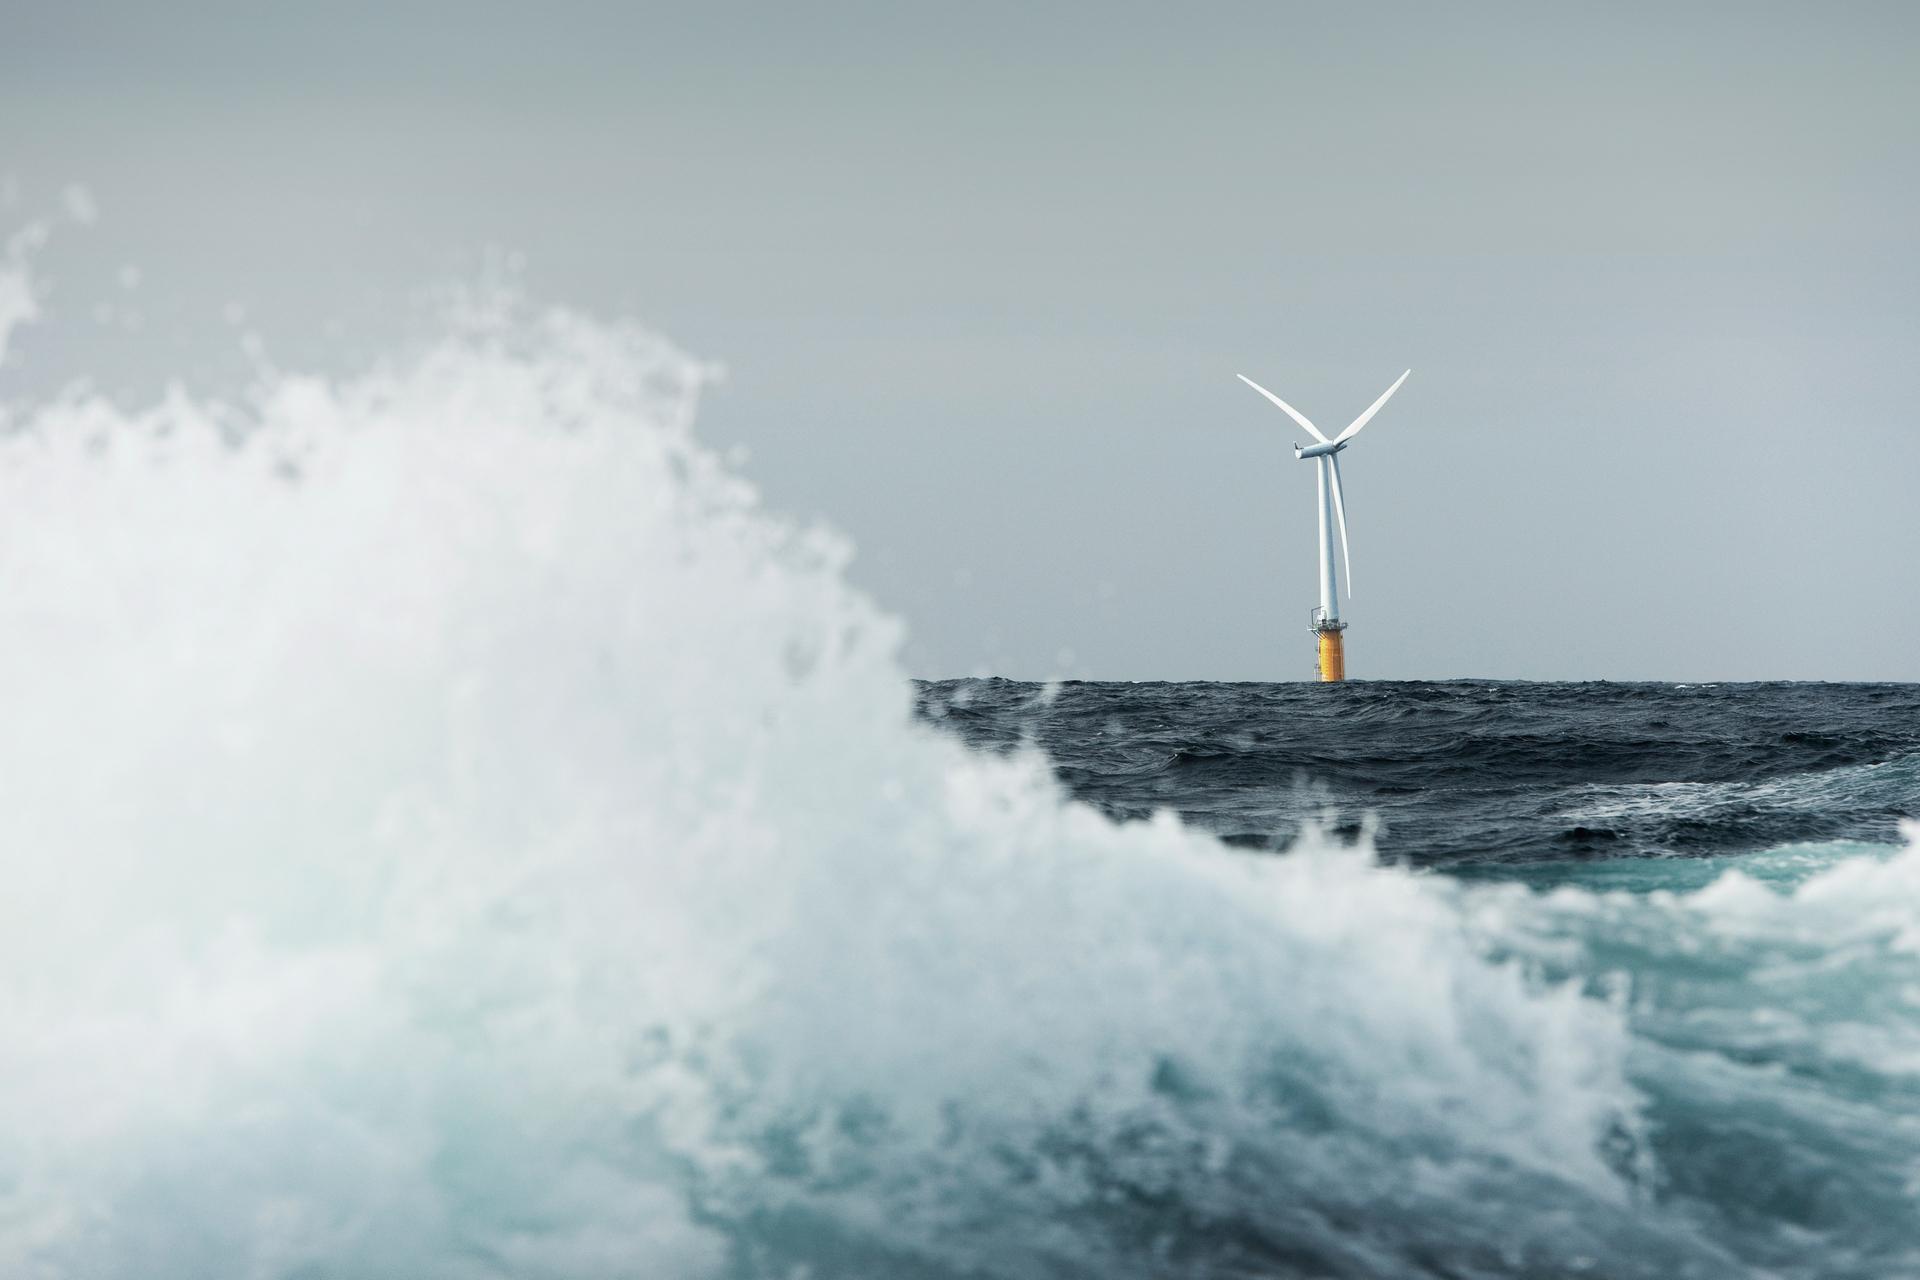 Floating offshore wind turbine on the horizon with large wave in the foreground